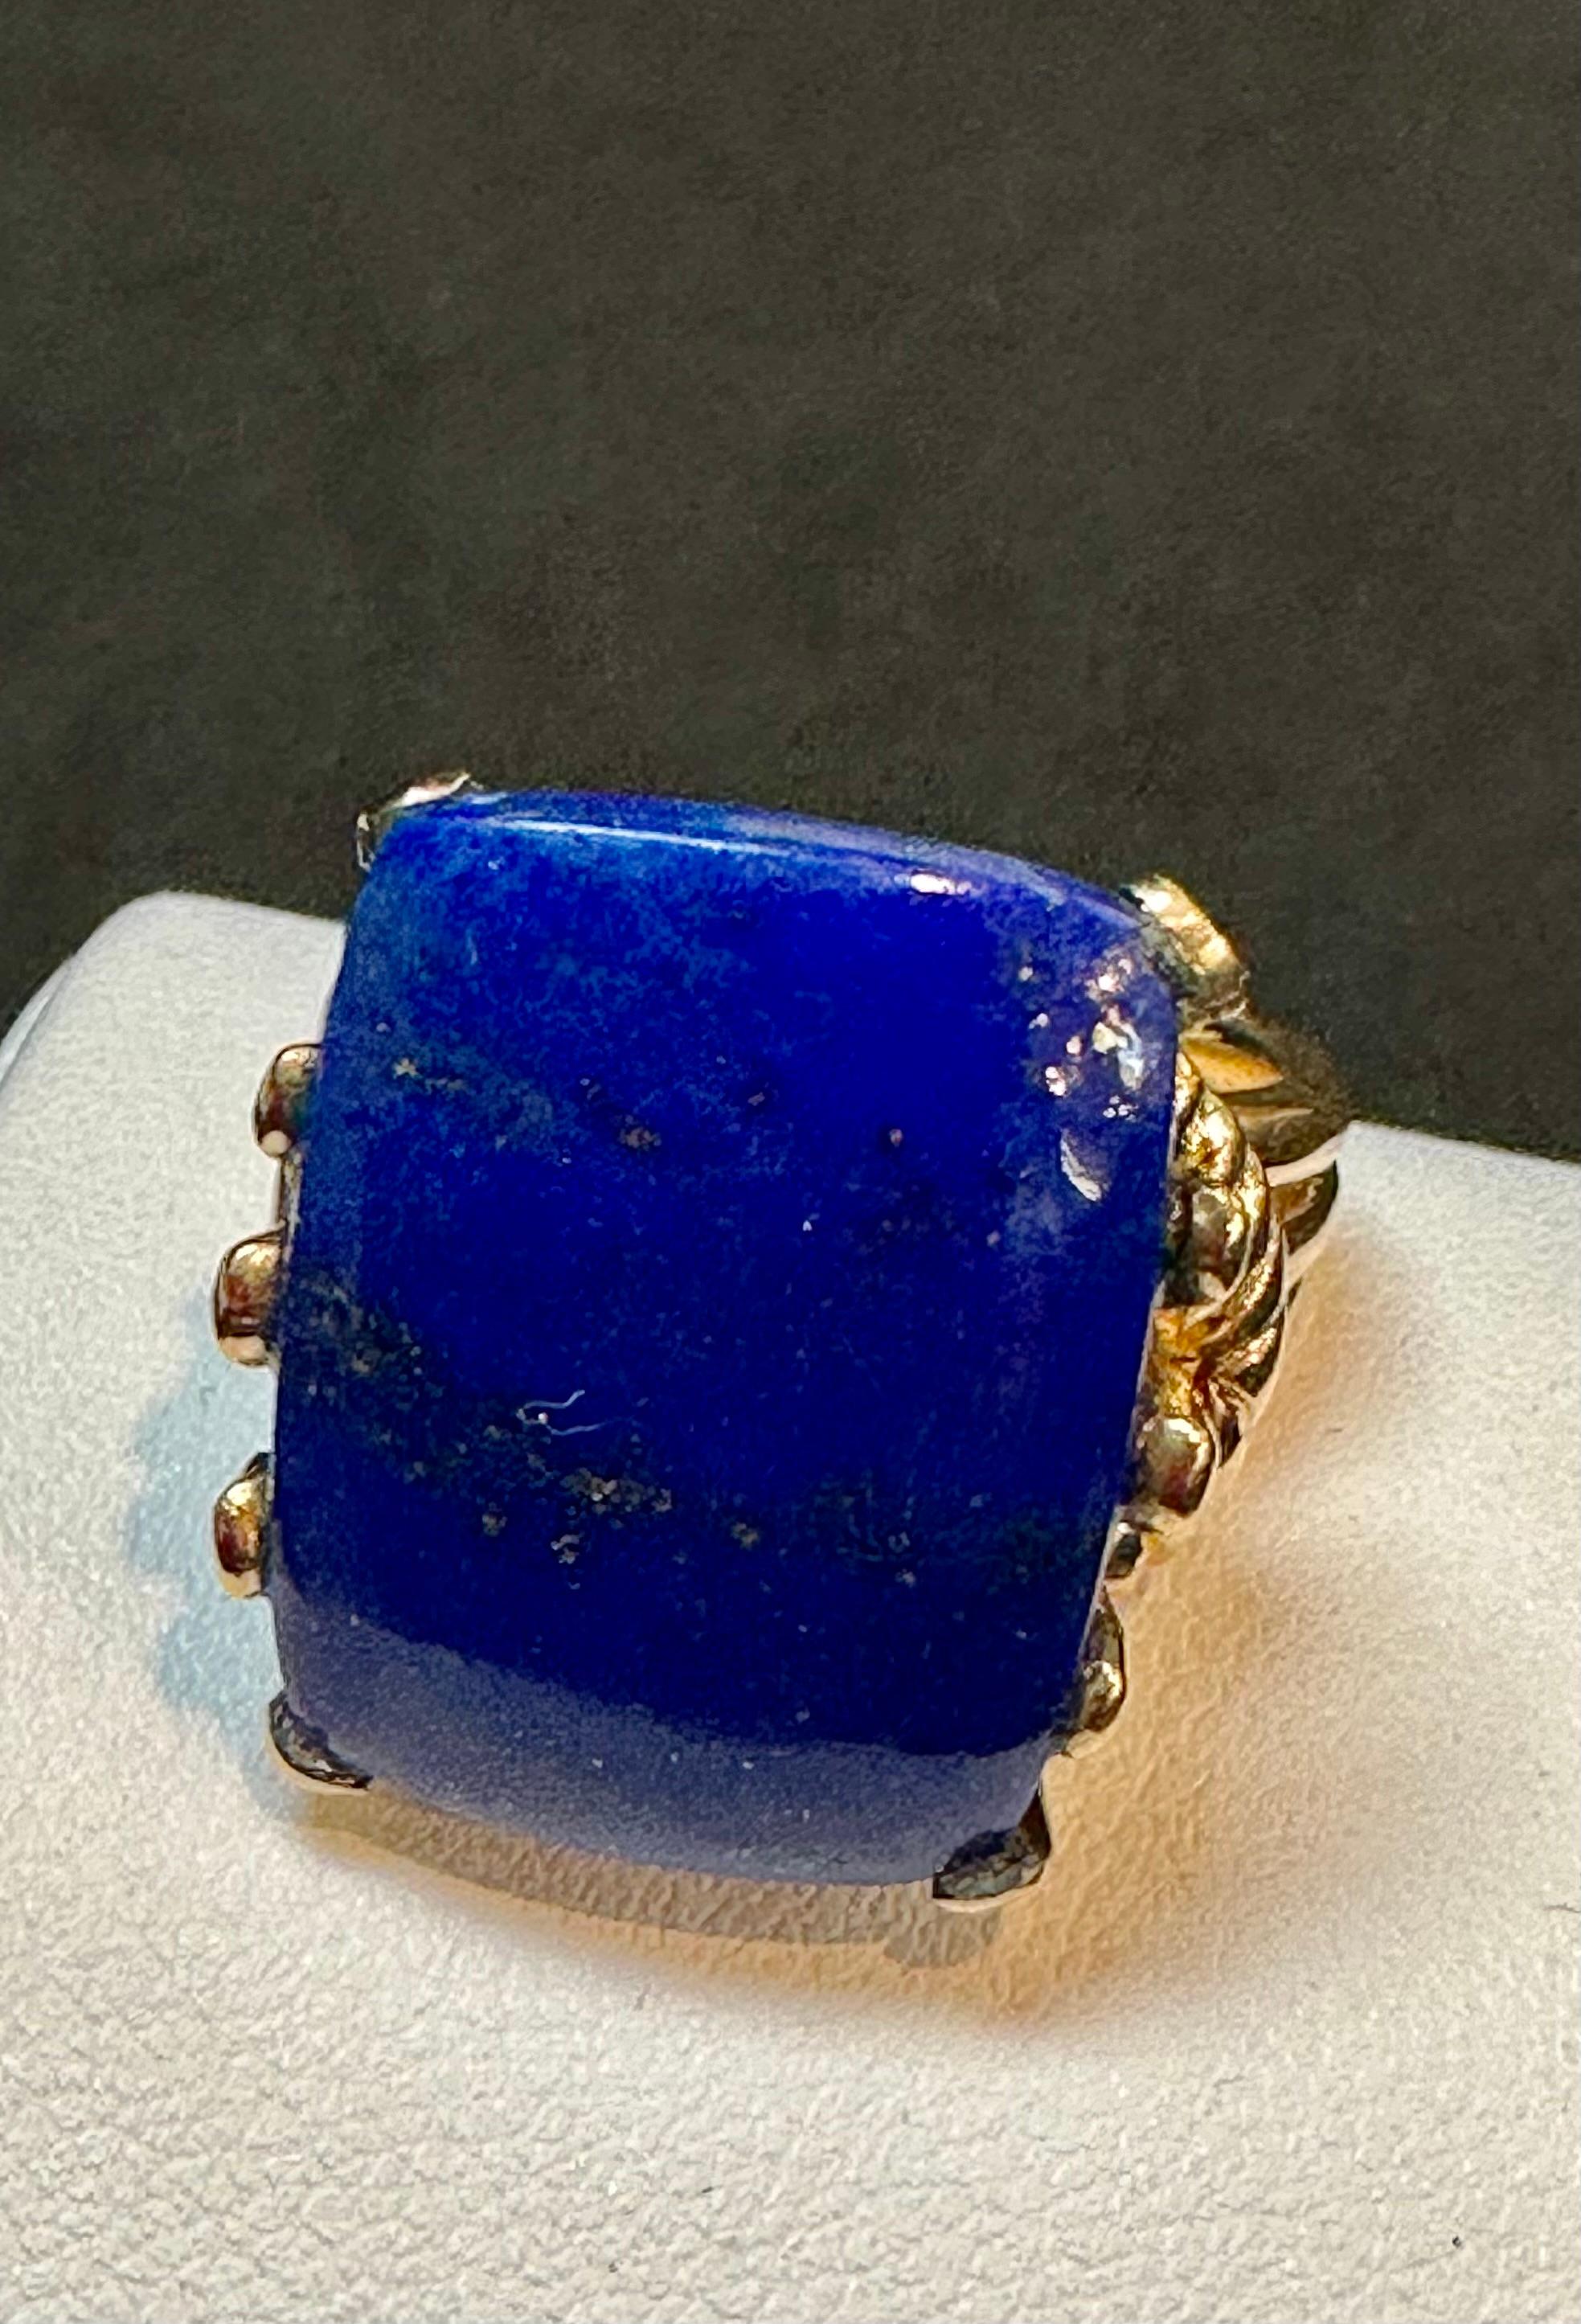 15 Ct Emerald cut Natural Lapis Lazuli Ring in 14 Kt Yellow Gold, Estate Size 7 For Sale 1